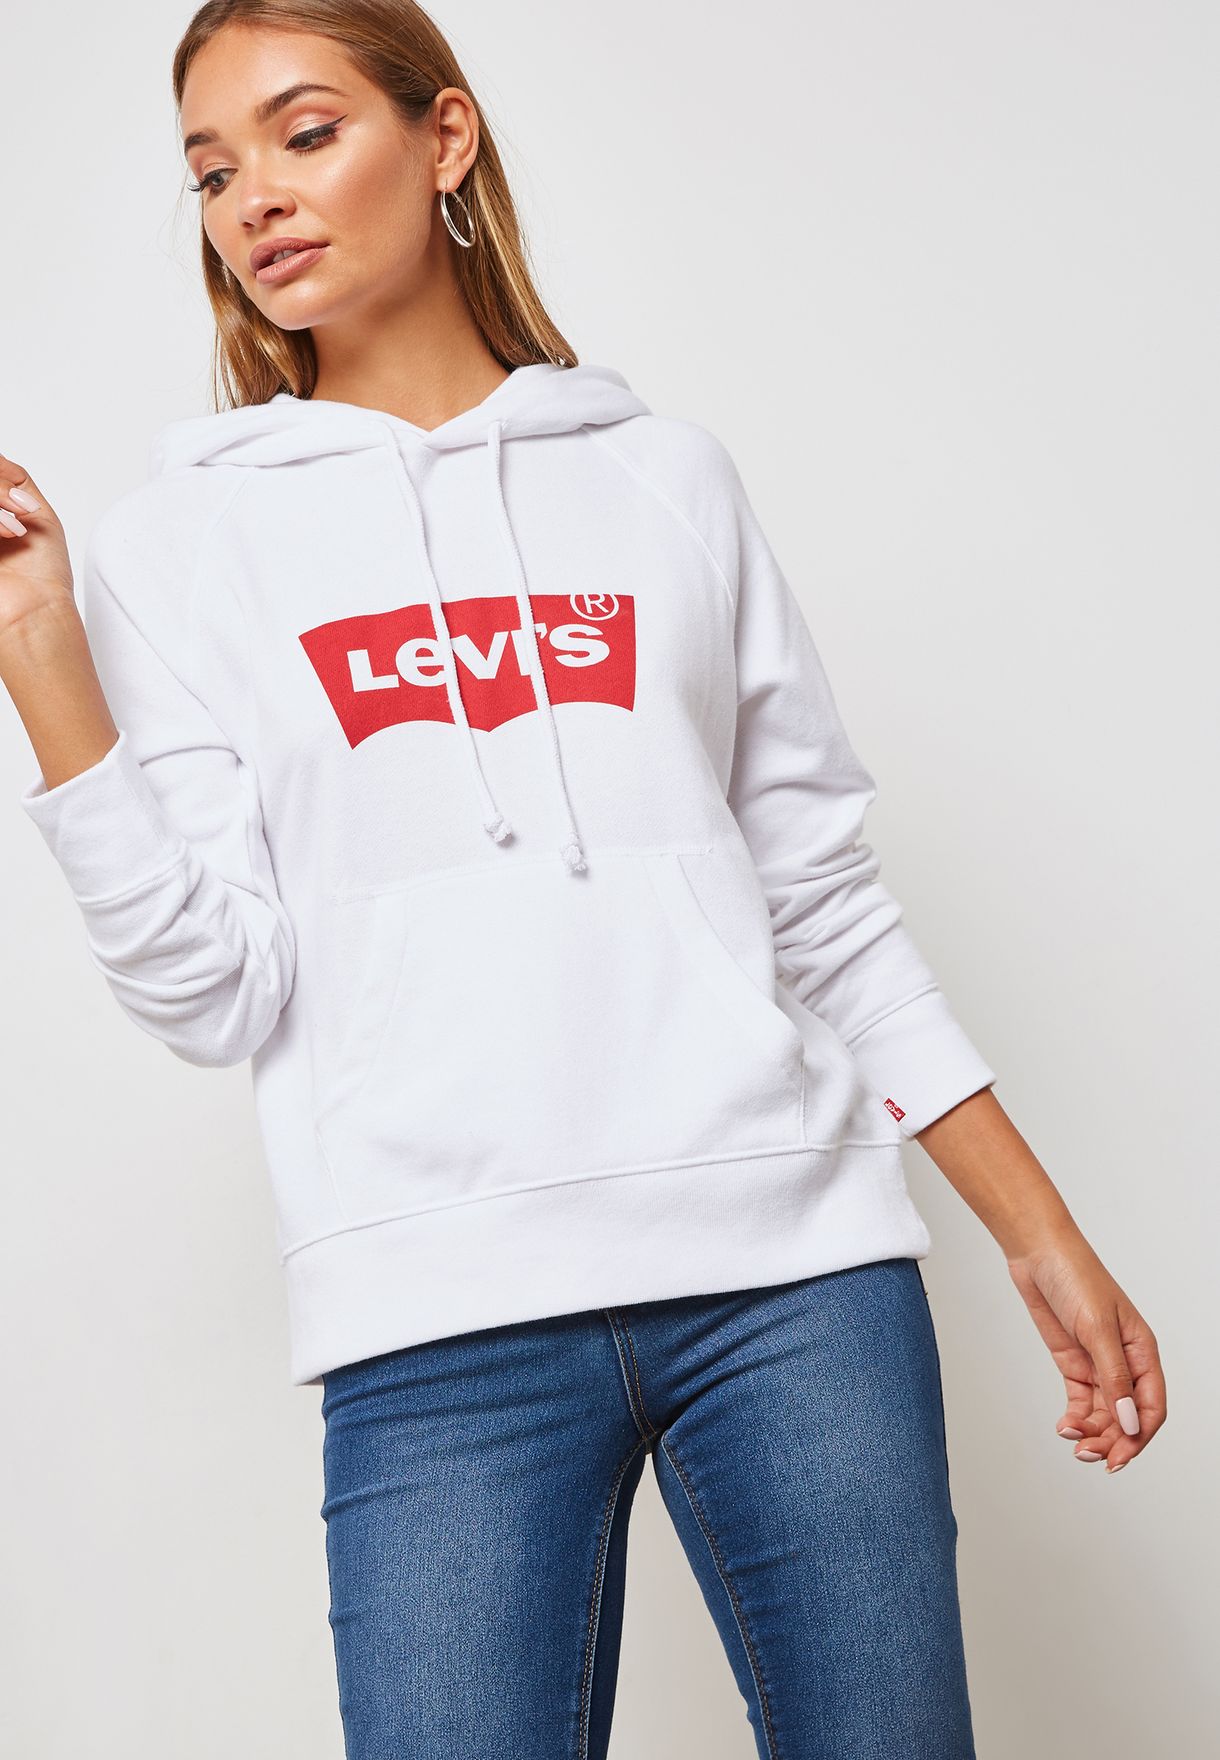 cheapest place to buy levis